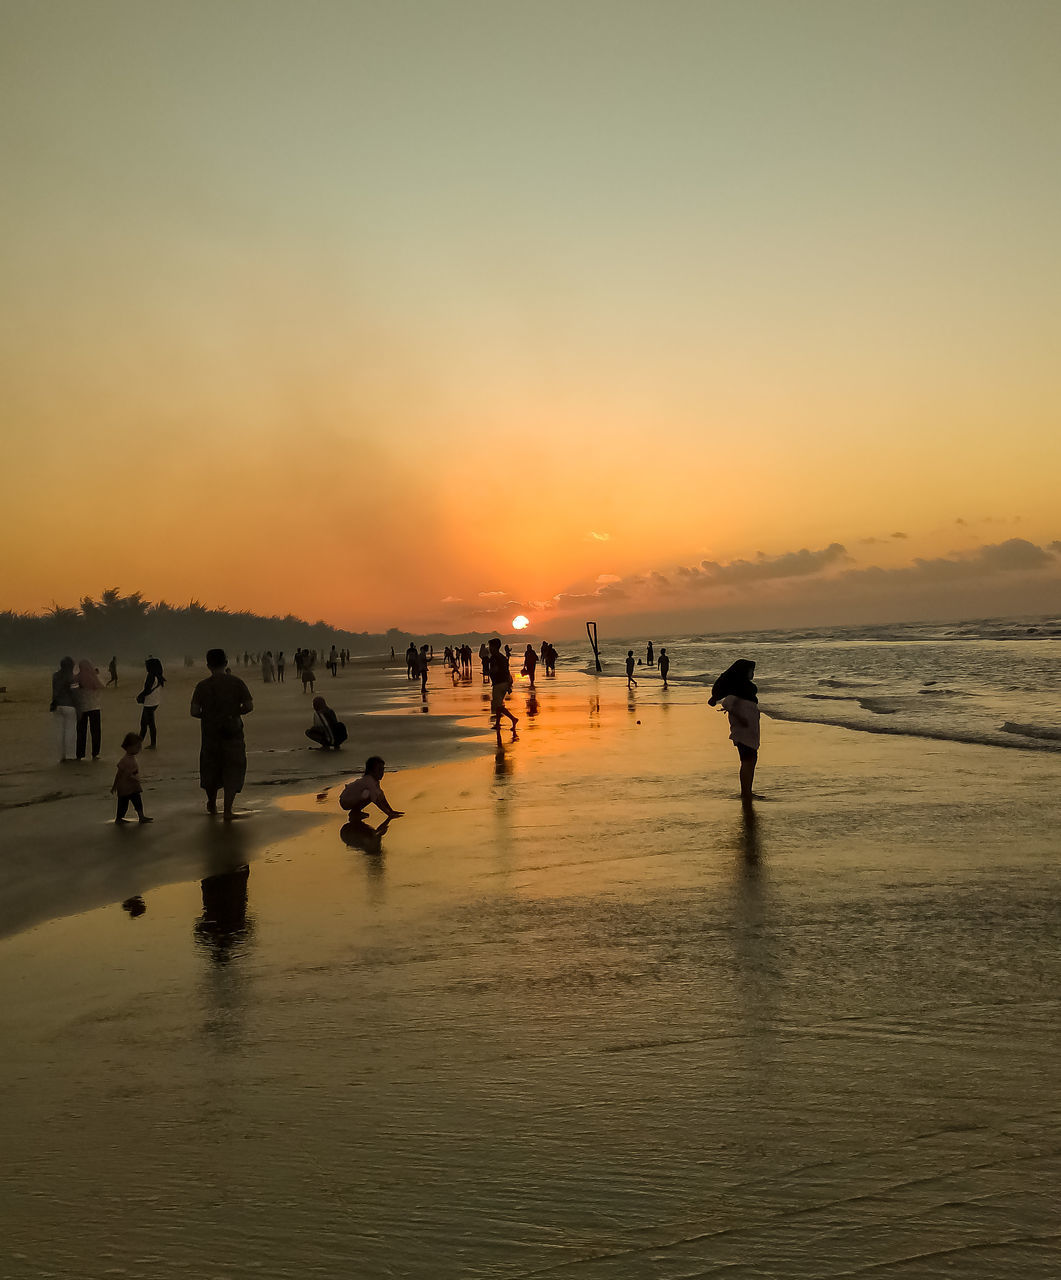 water, sunset, sky, sea, beach, land, group of people, nature, horizon, body of water, beauty in nature, ocean, large group of people, scenics - nature, silhouette, shore, crowd, coast, dusk, wave, orange color, reflection, men, leisure activity, trip, vacation, evening, holiday, sand, lifestyles, sun, outdoors, women, travel destinations, travel, adult, sports, sunlight, tranquility, environment, walking, enjoyment, motion, person, idyllic